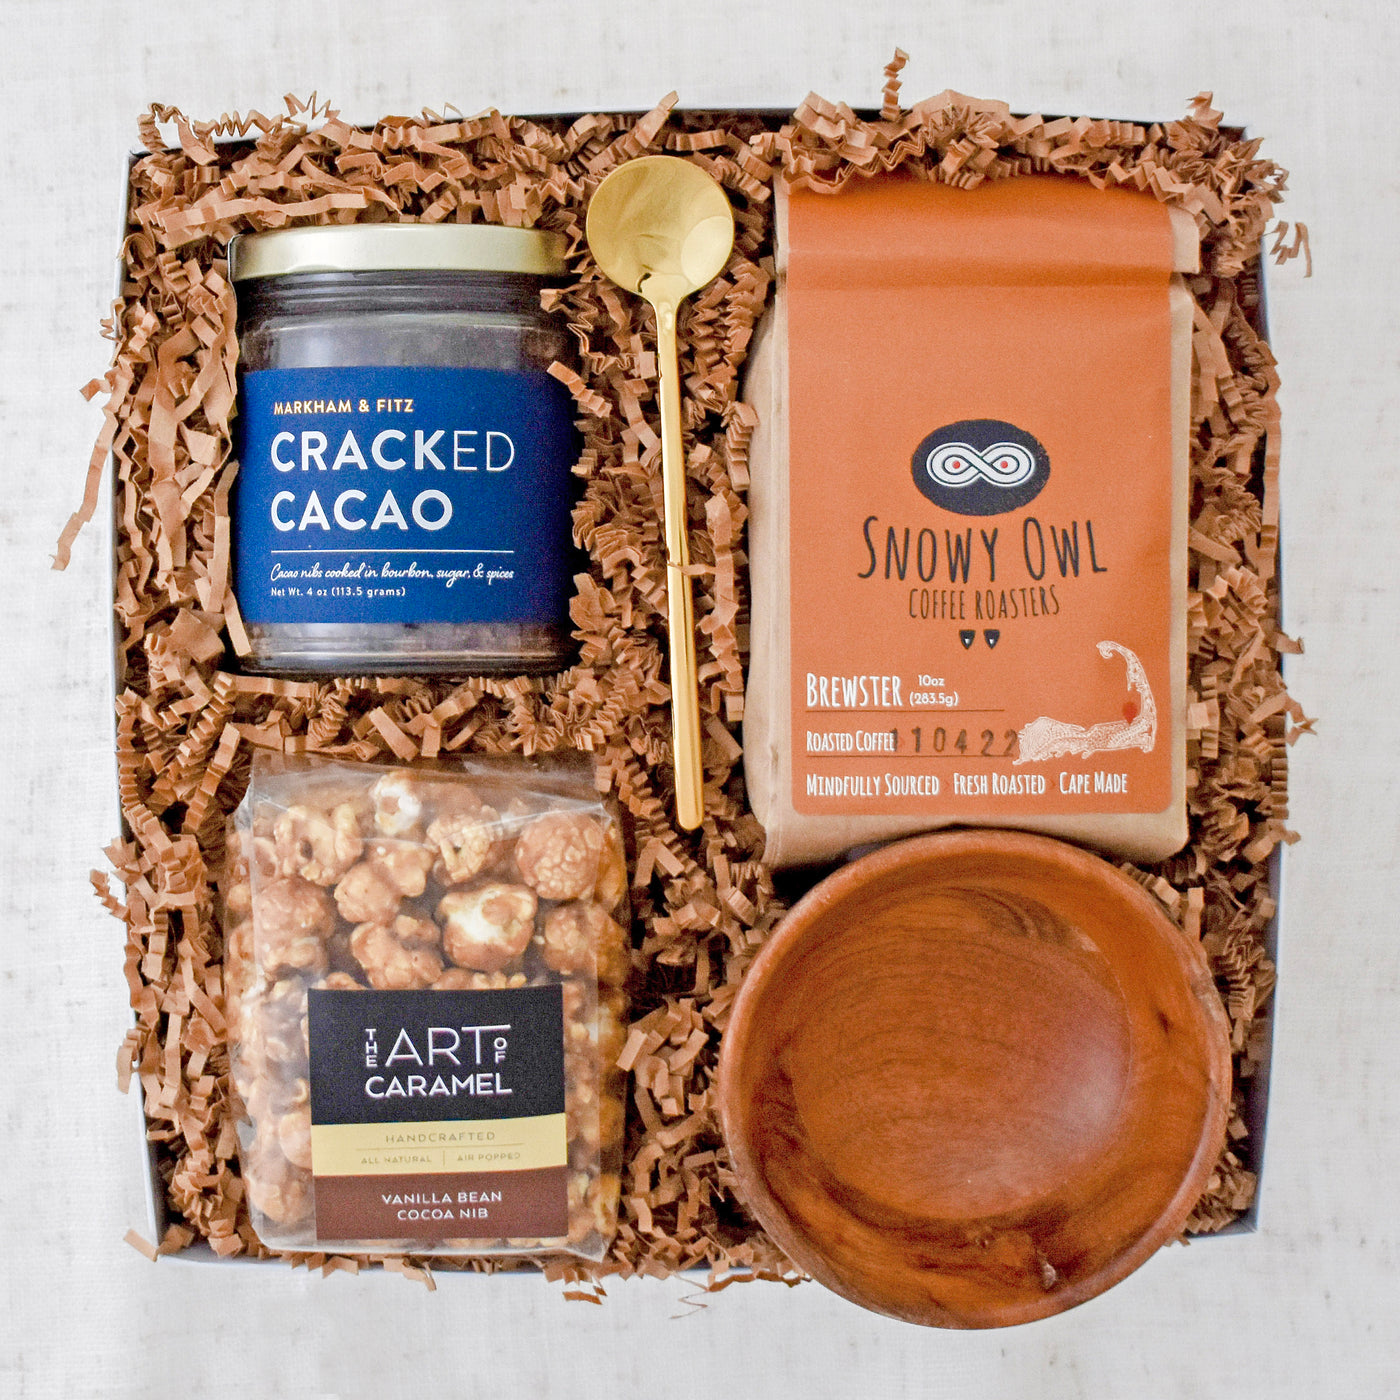 Encourage the break from reality to enjoy some sweet treats and a cup of joe. This gift basket includes: Cracked Cacao, Brewster Coffee, Vanilla Bean Cocoa Nib Popcorn, Wooden Pinch Bowl, Gold Stirring Spoon